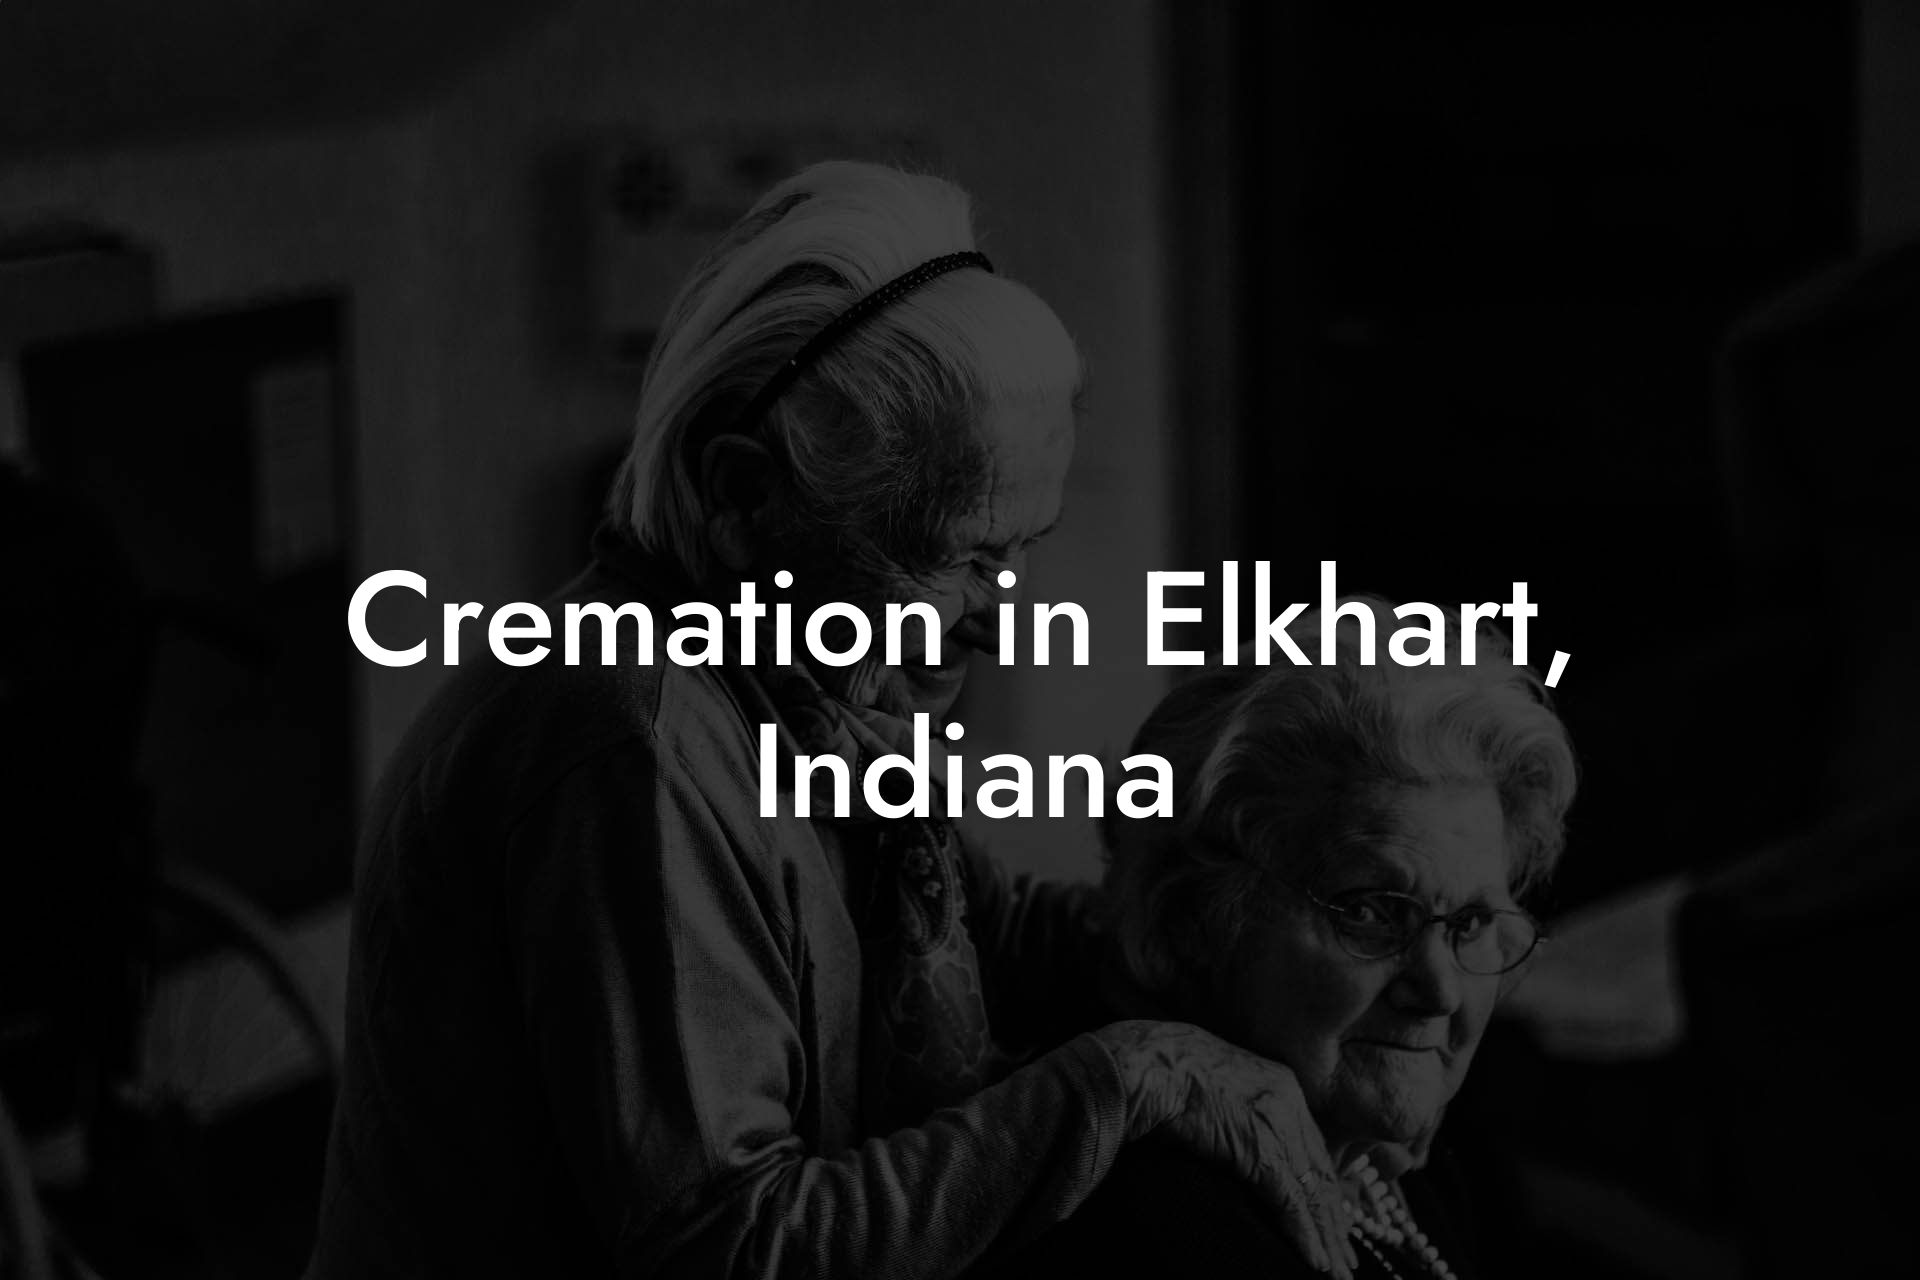 Cremation in Elkhart, Indiana